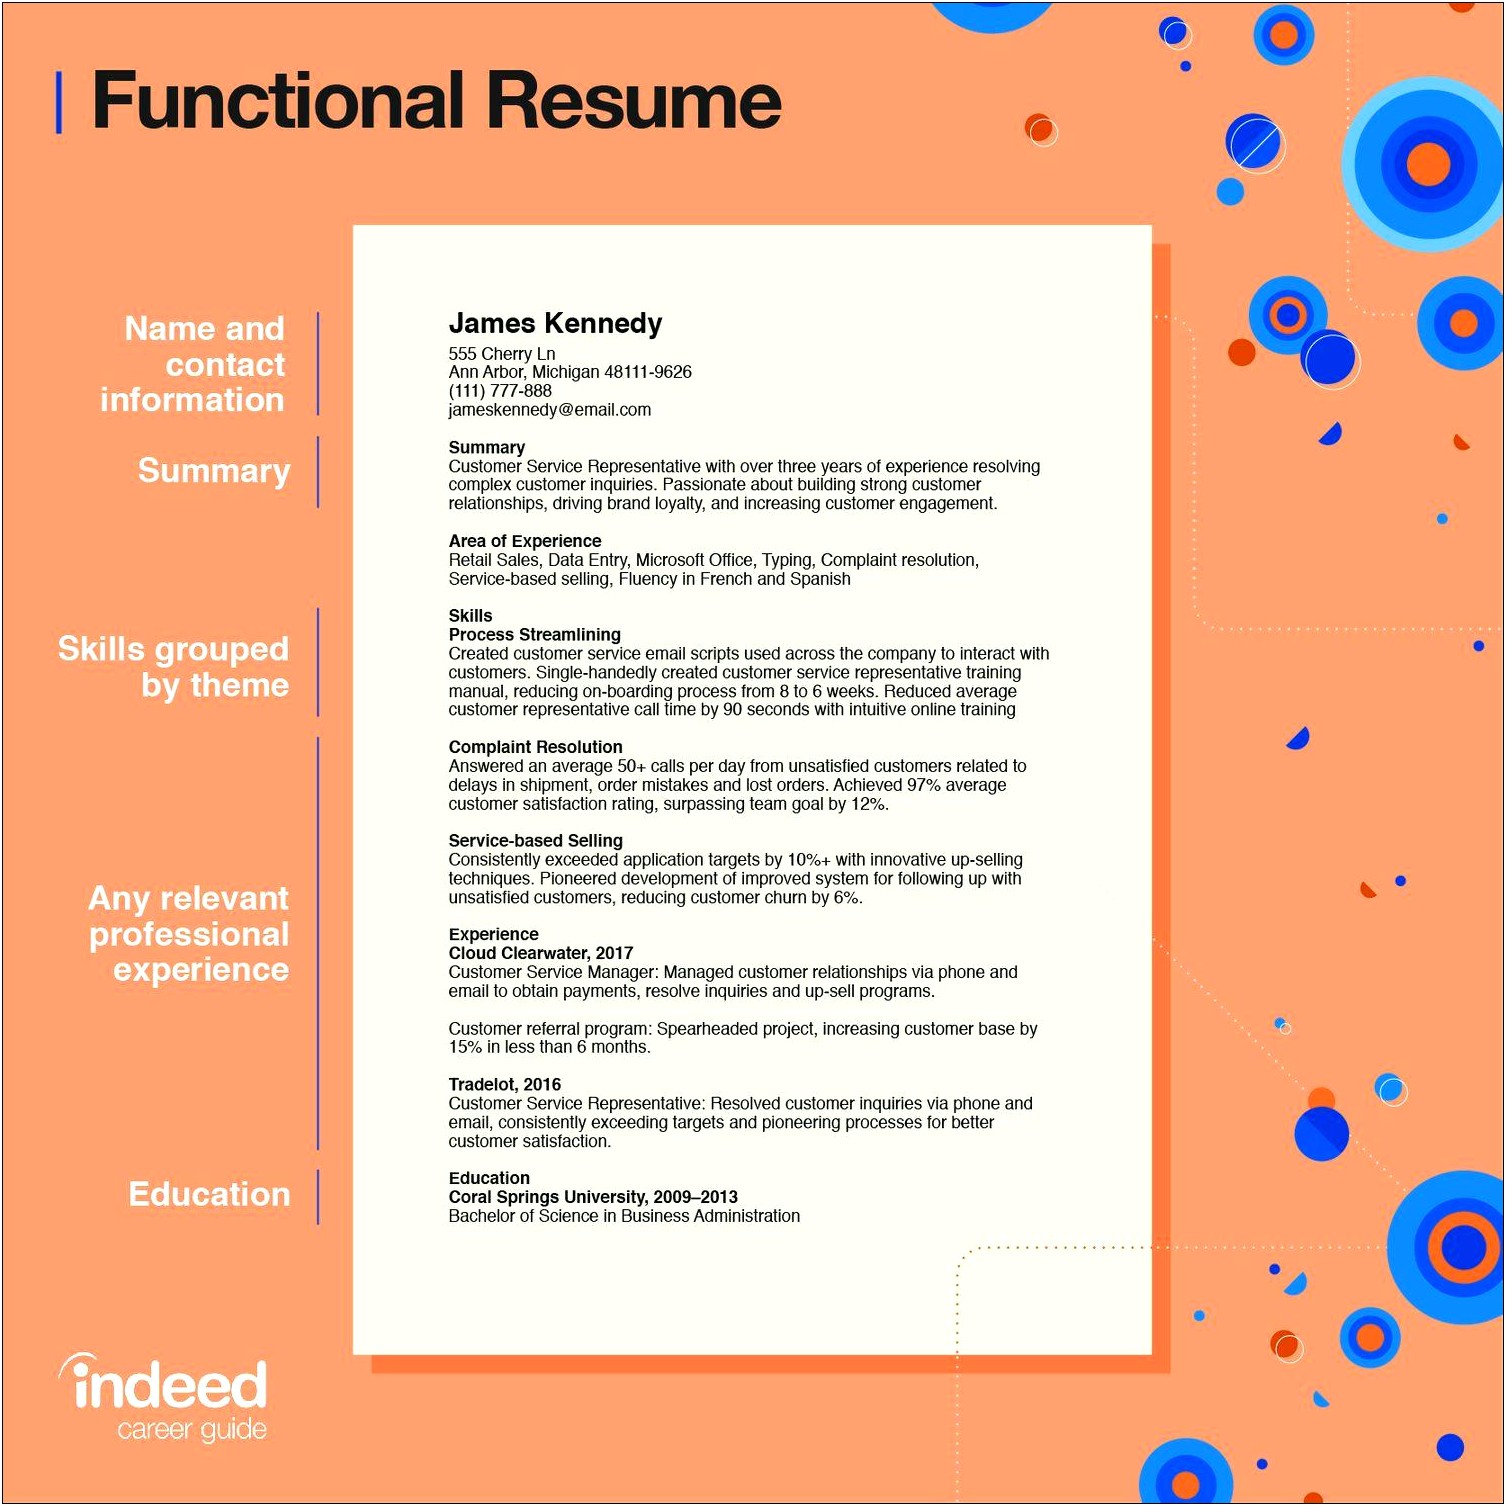 Resume Professional Summary Point Of View